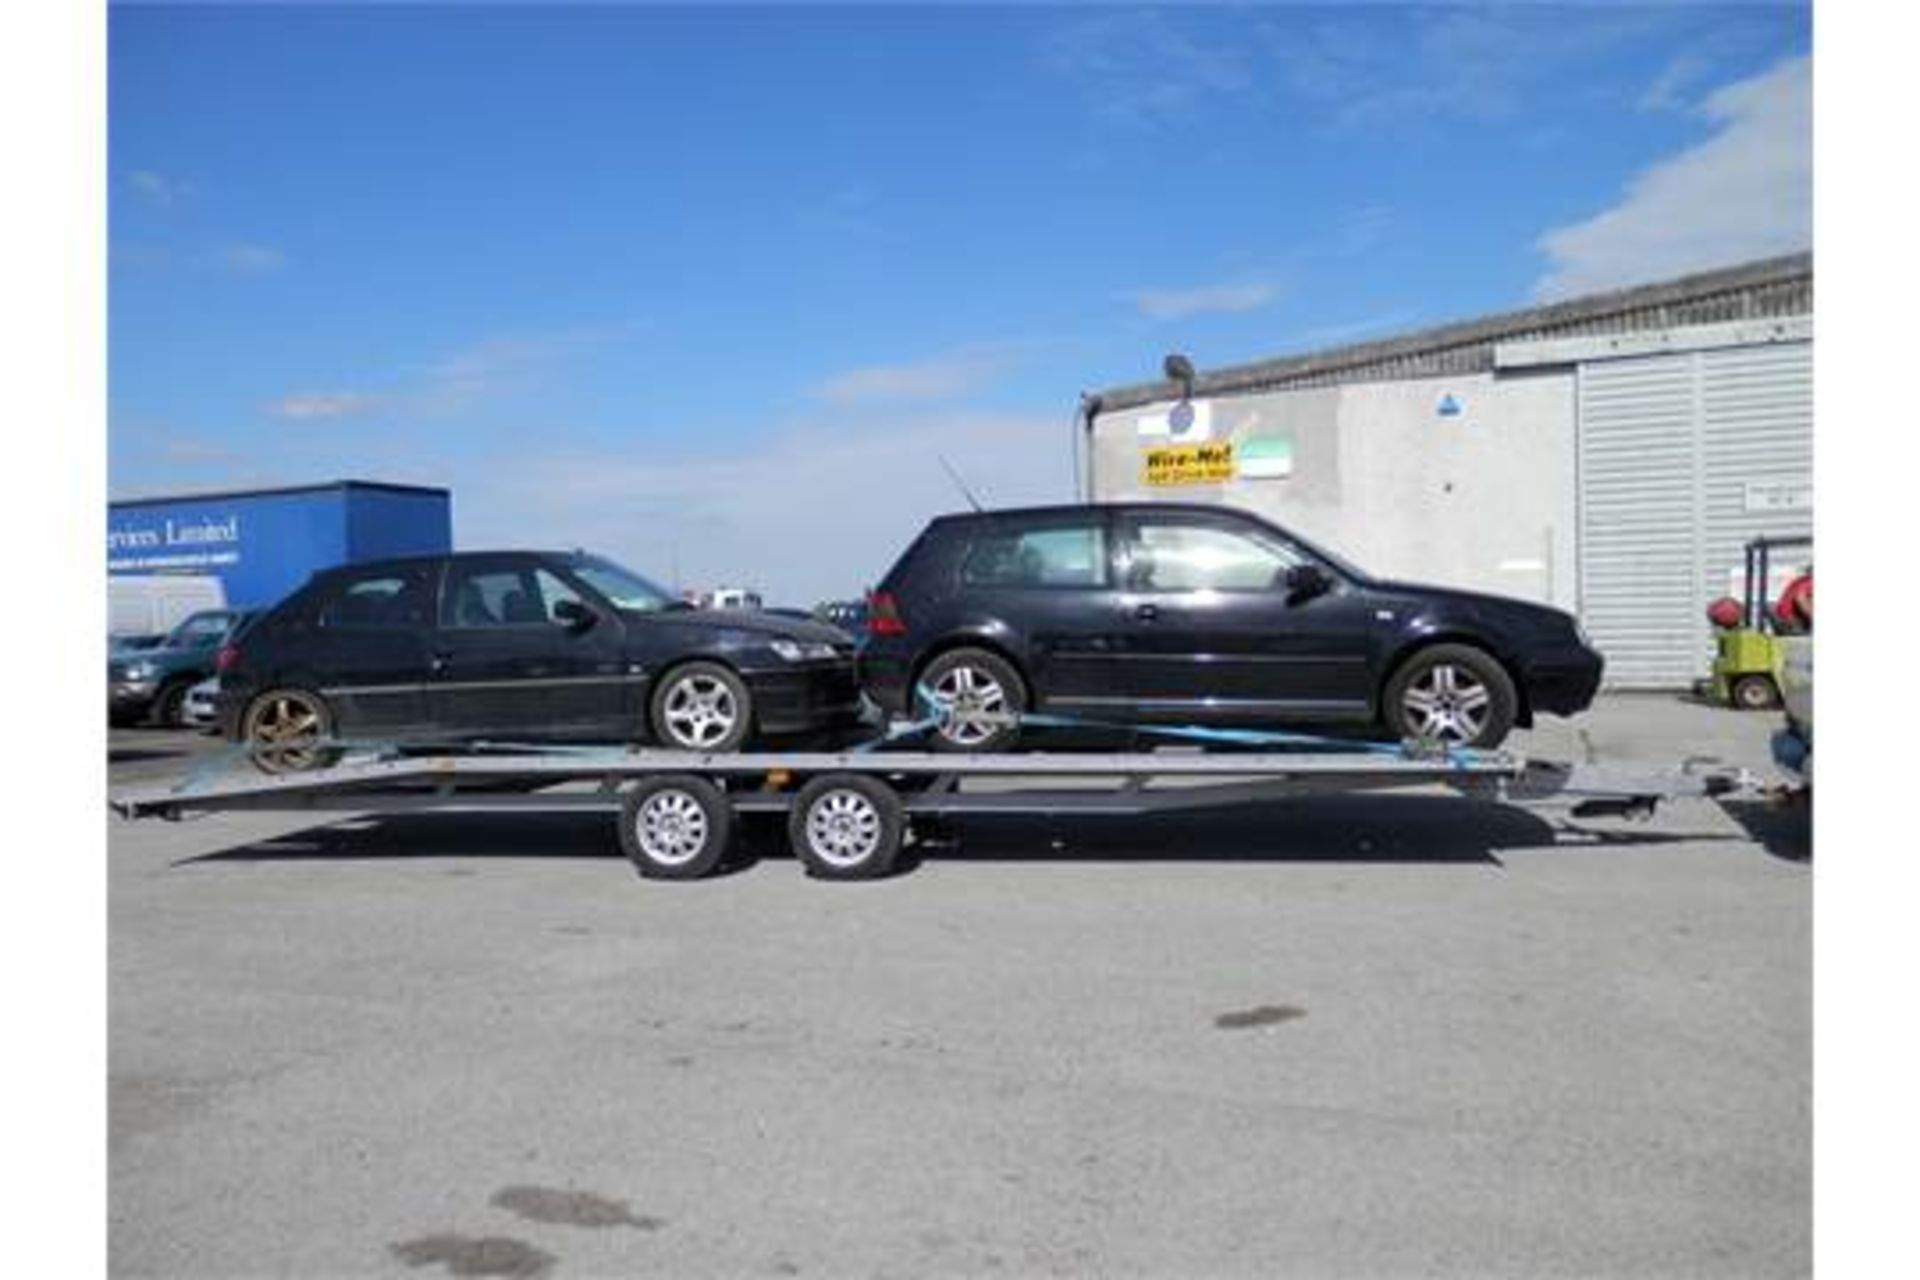 3400KG 2 CAR TRAILER, 2.5 TONNE CARRYING CAPACITY !! GOOD ALLOYS/TYRES & SPARE WHEEL. - Image 11 of 11